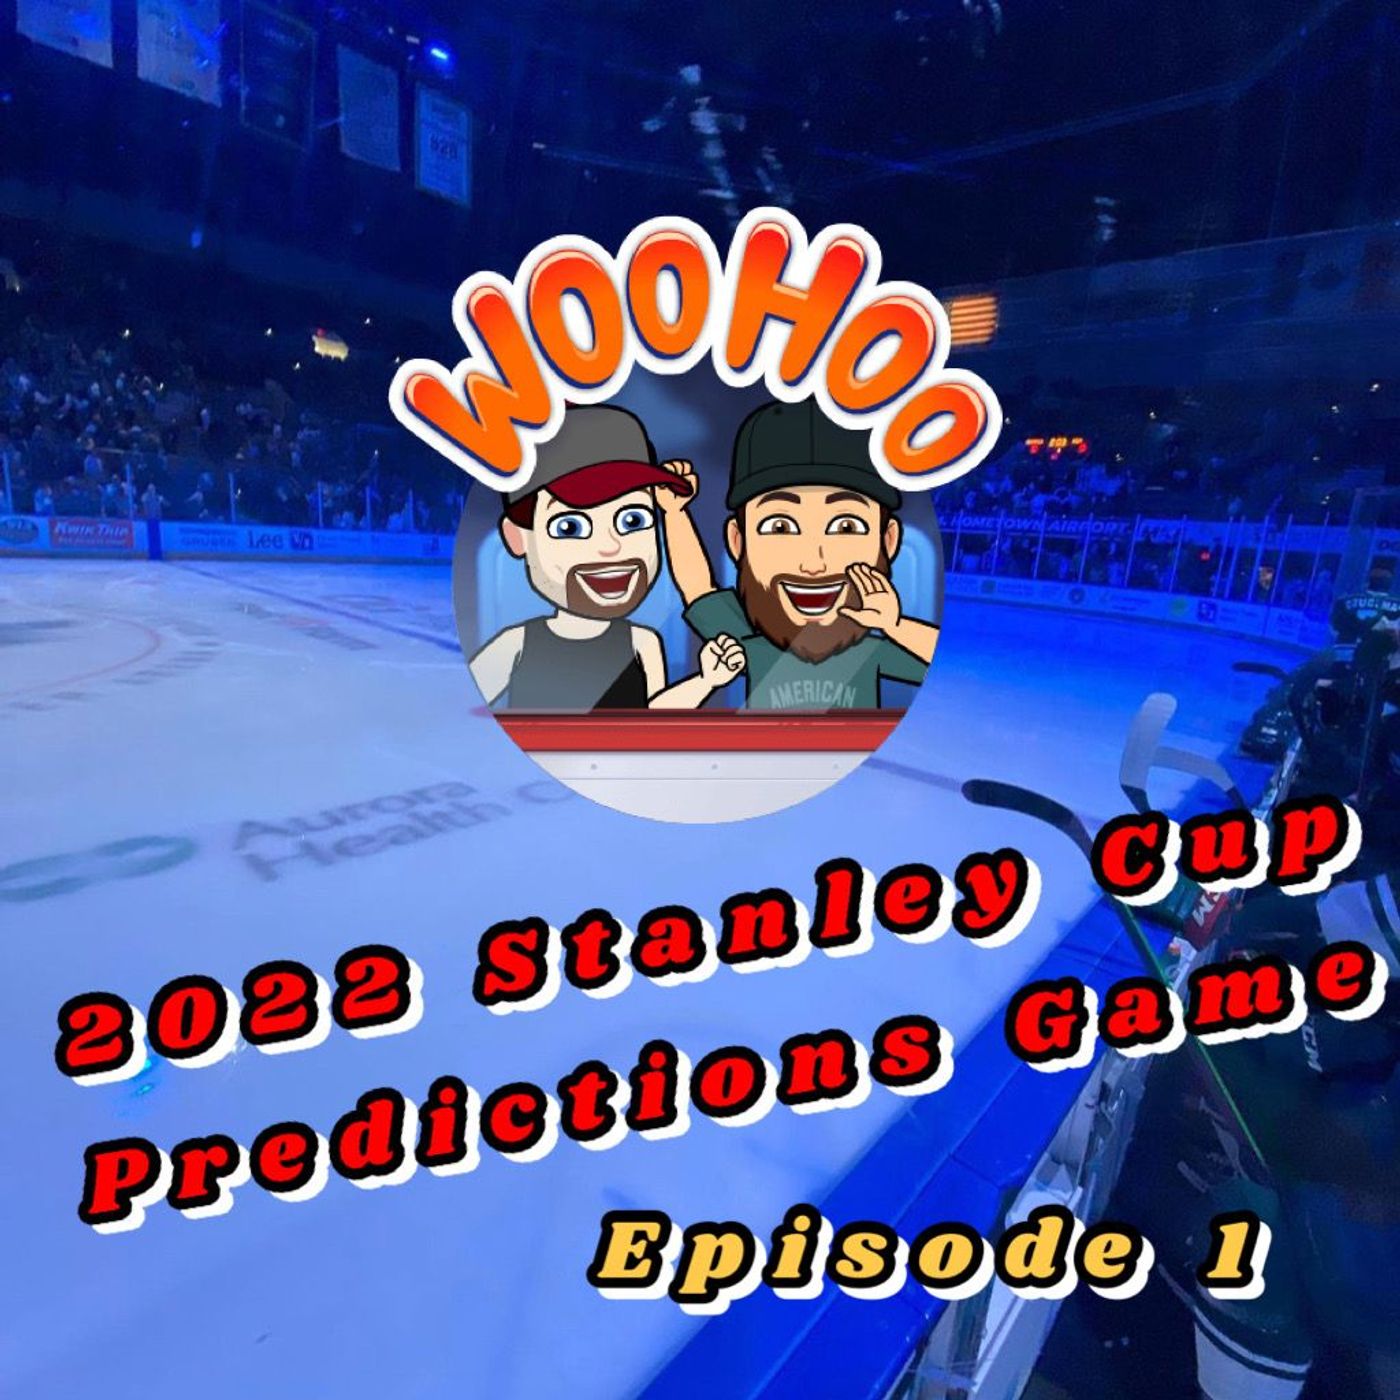 2022 Stanley Cup Predictions Game Episode 1